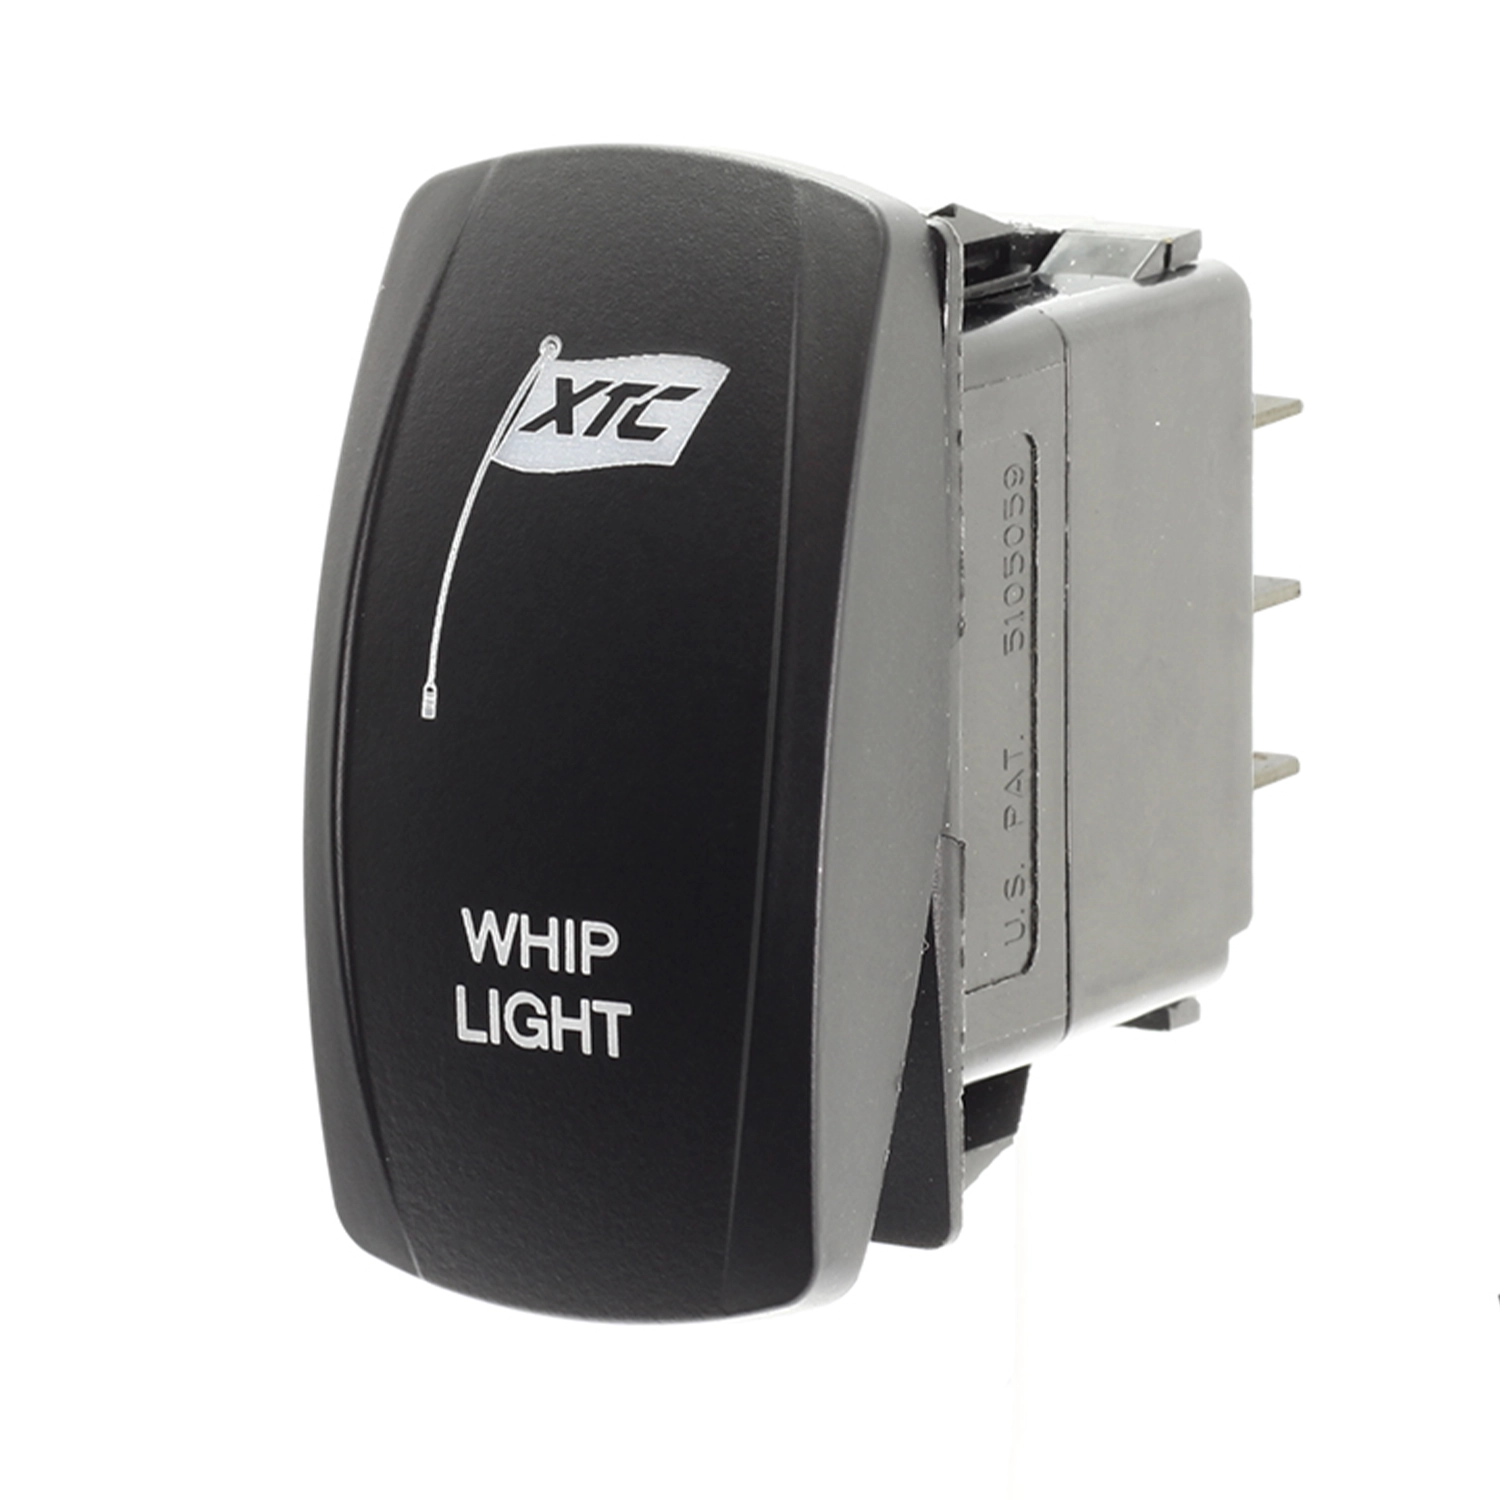 xtc power products whip light rocker switch 2